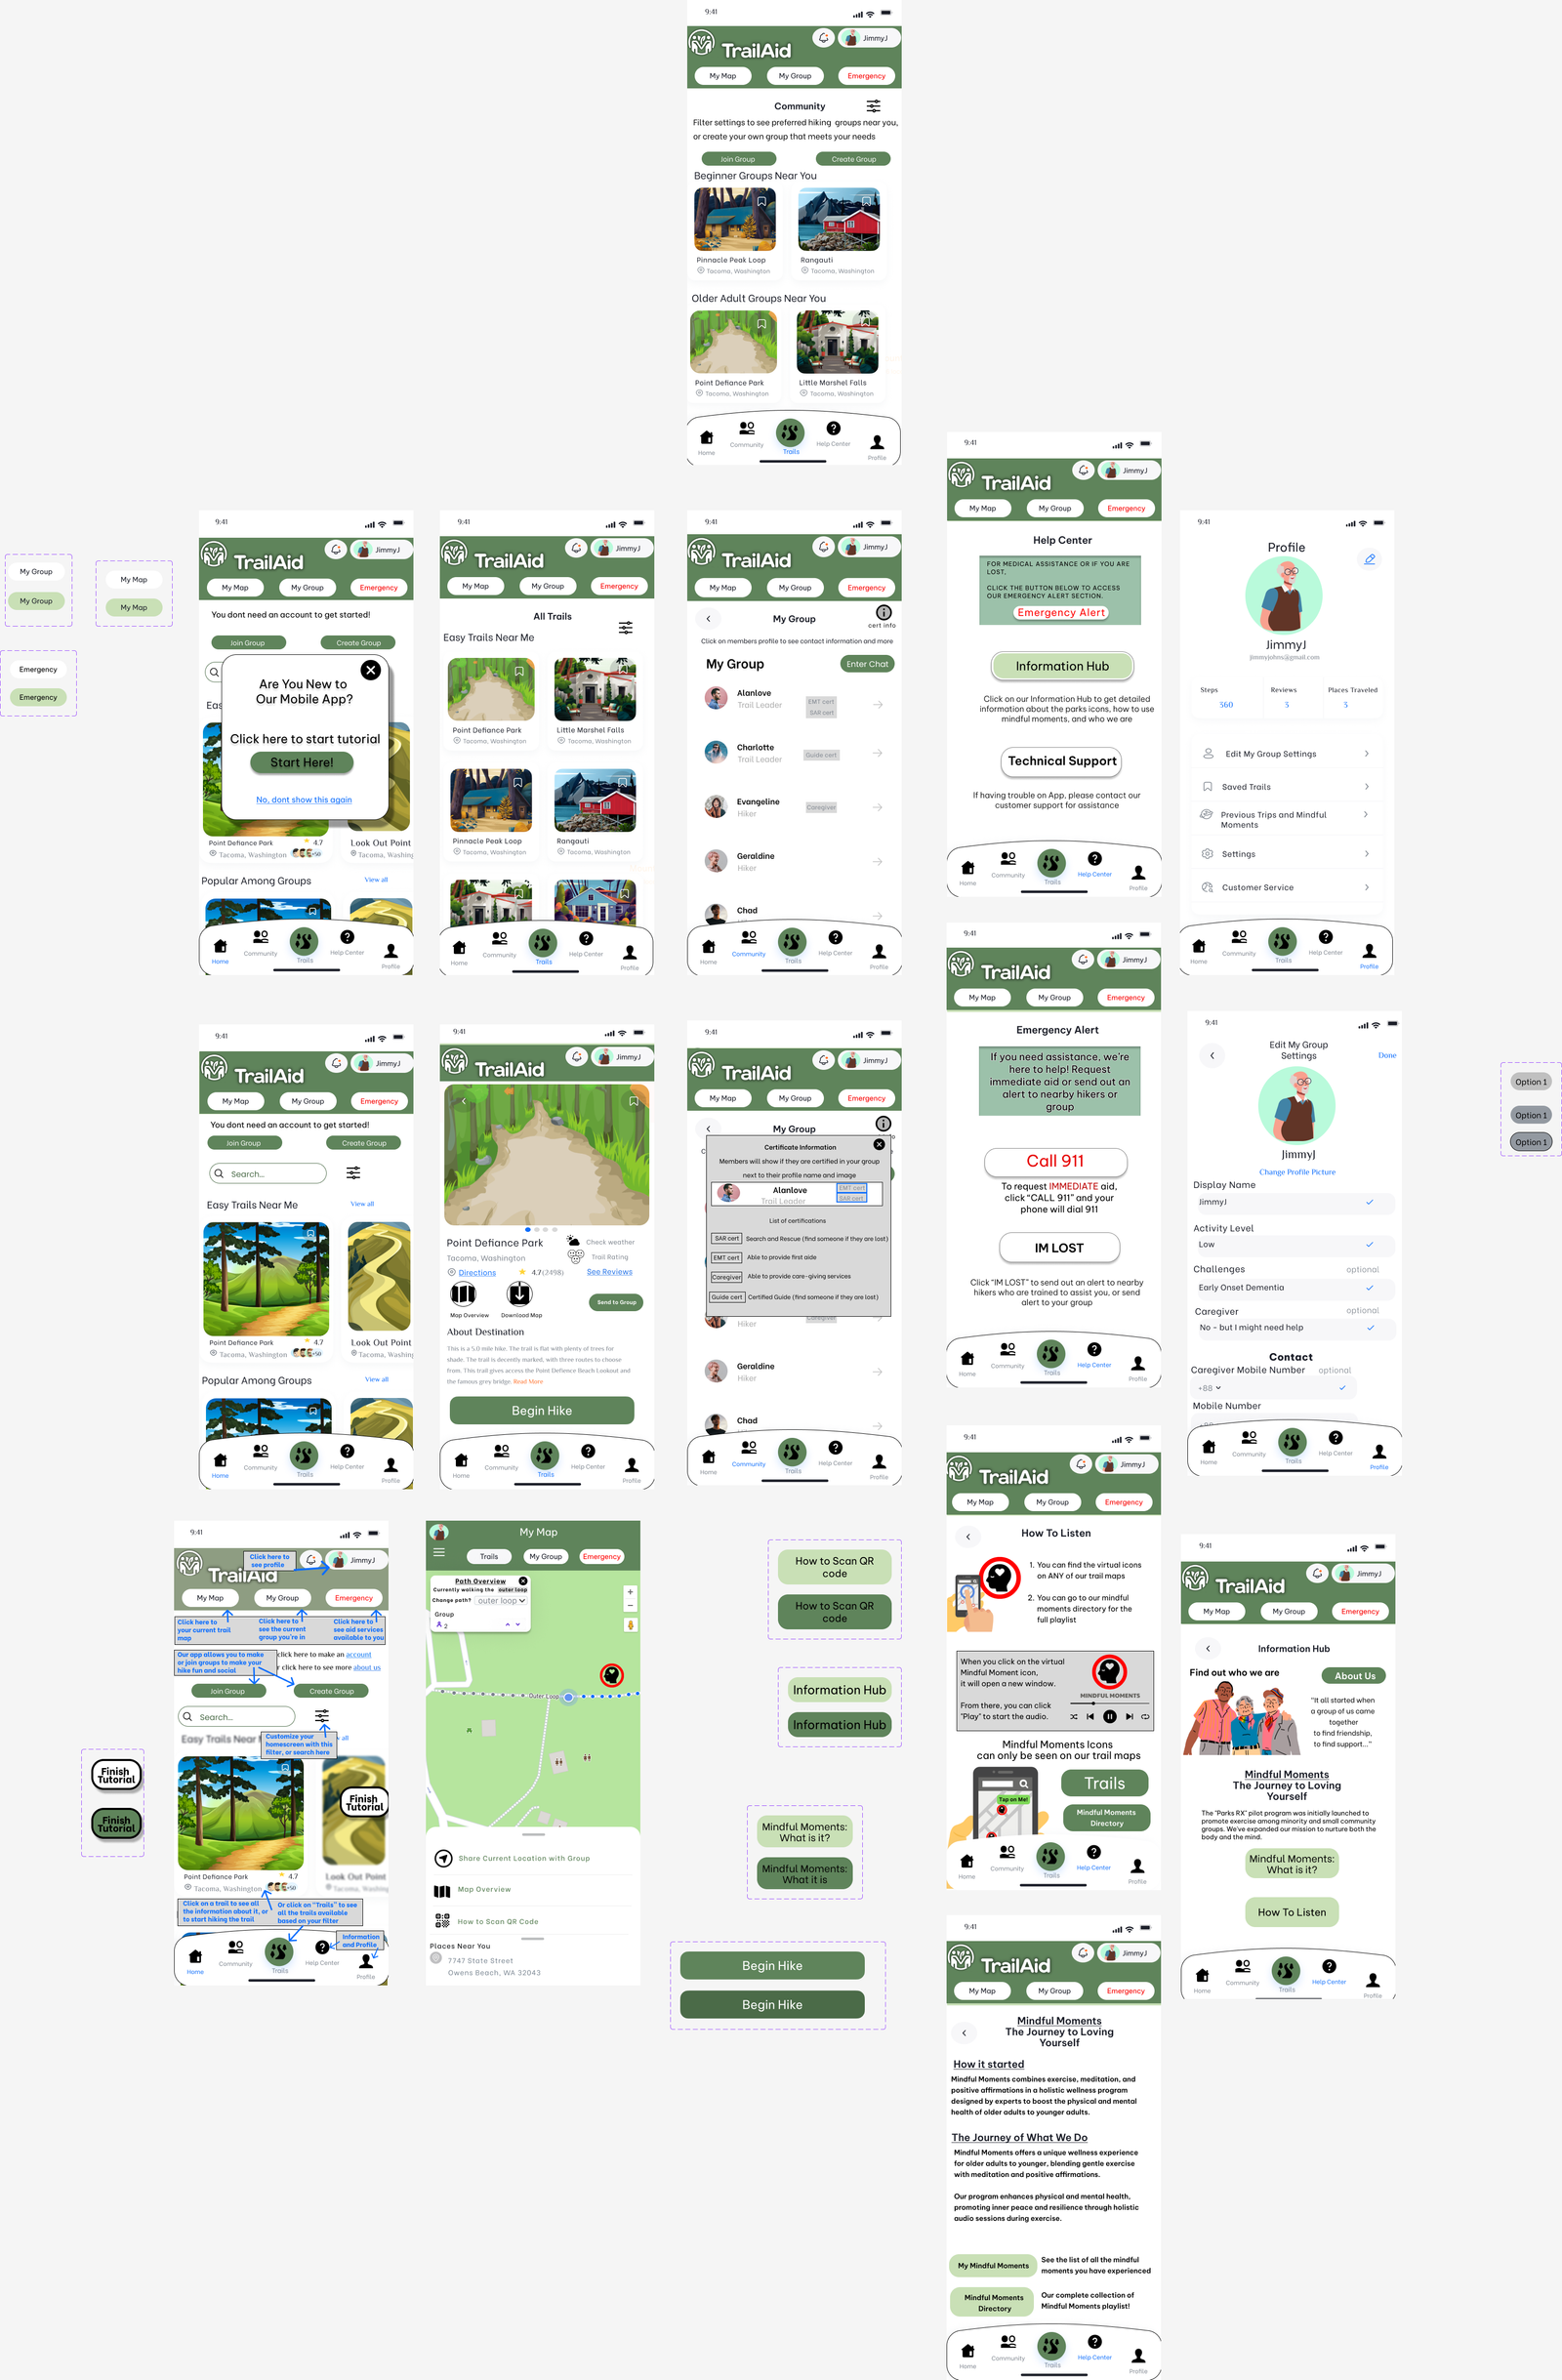 Overview of all the sections of the trail aid app